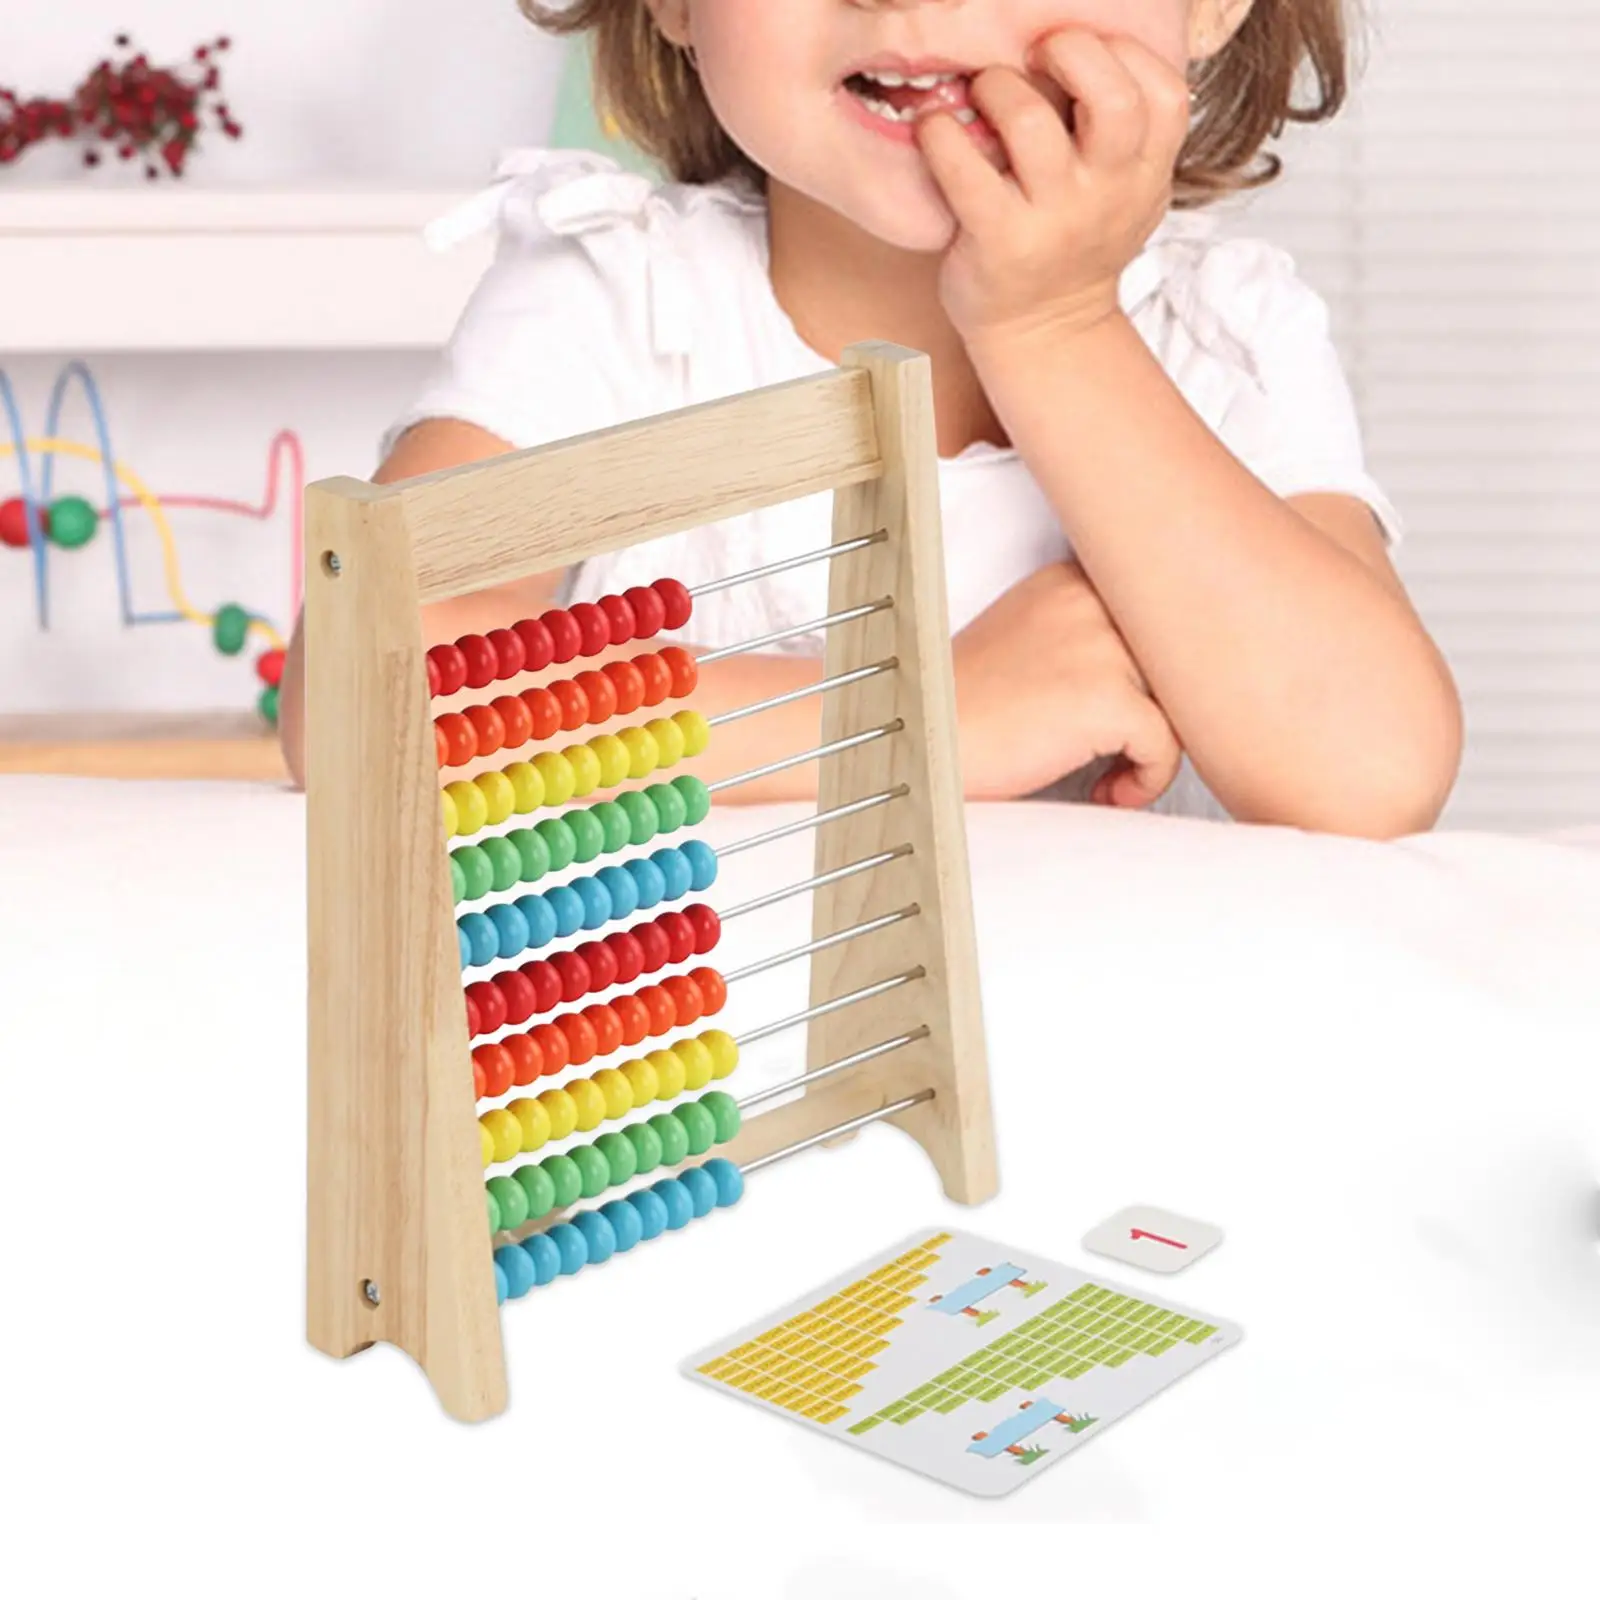 Wooden Abacus Toy Early Childhood Education Mathematics Toy Educational Counting Toy for Children Elementary Boys Girls Toddlers